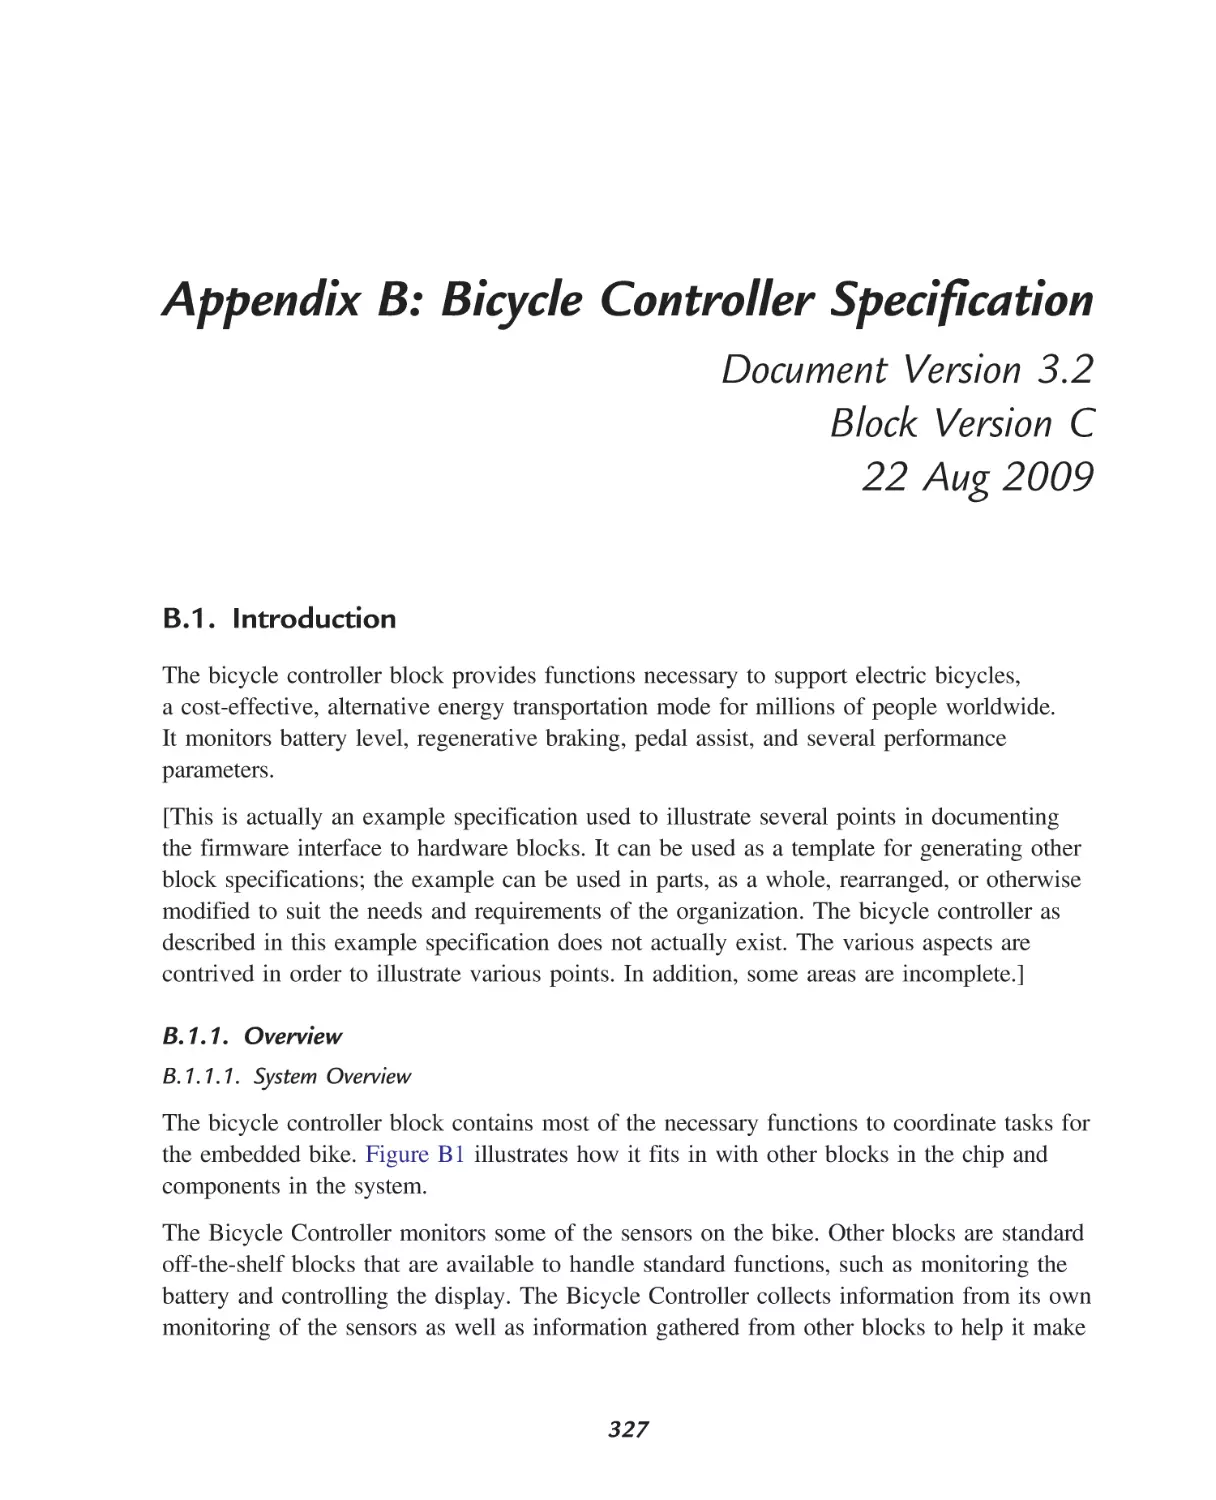 B Bicycle Controller Specification
Introduction
Overview